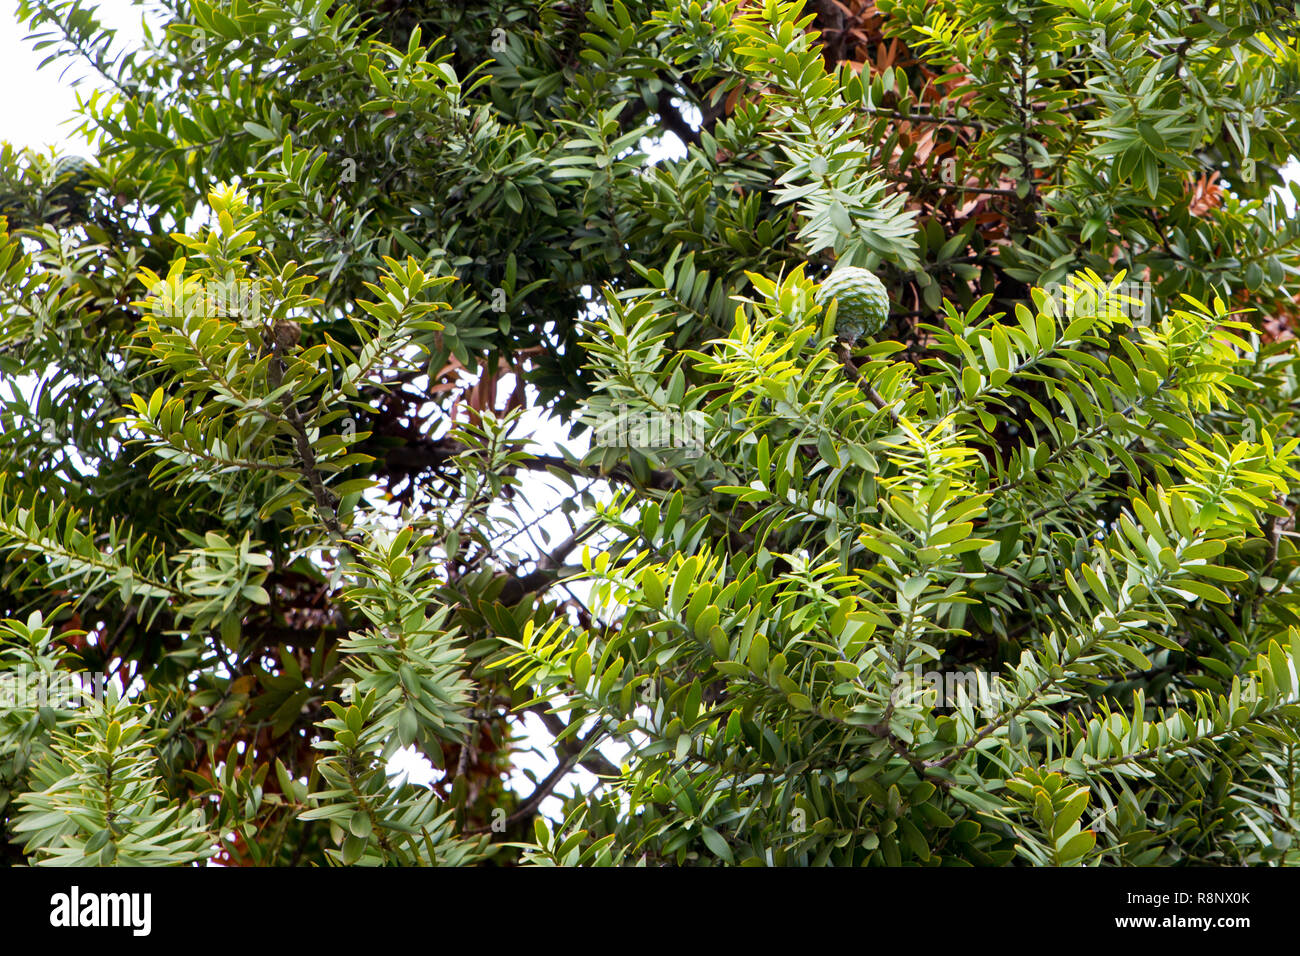 A young Kauri tree growing in Victoria Square, Christchurch, New Zealand Stock Photo